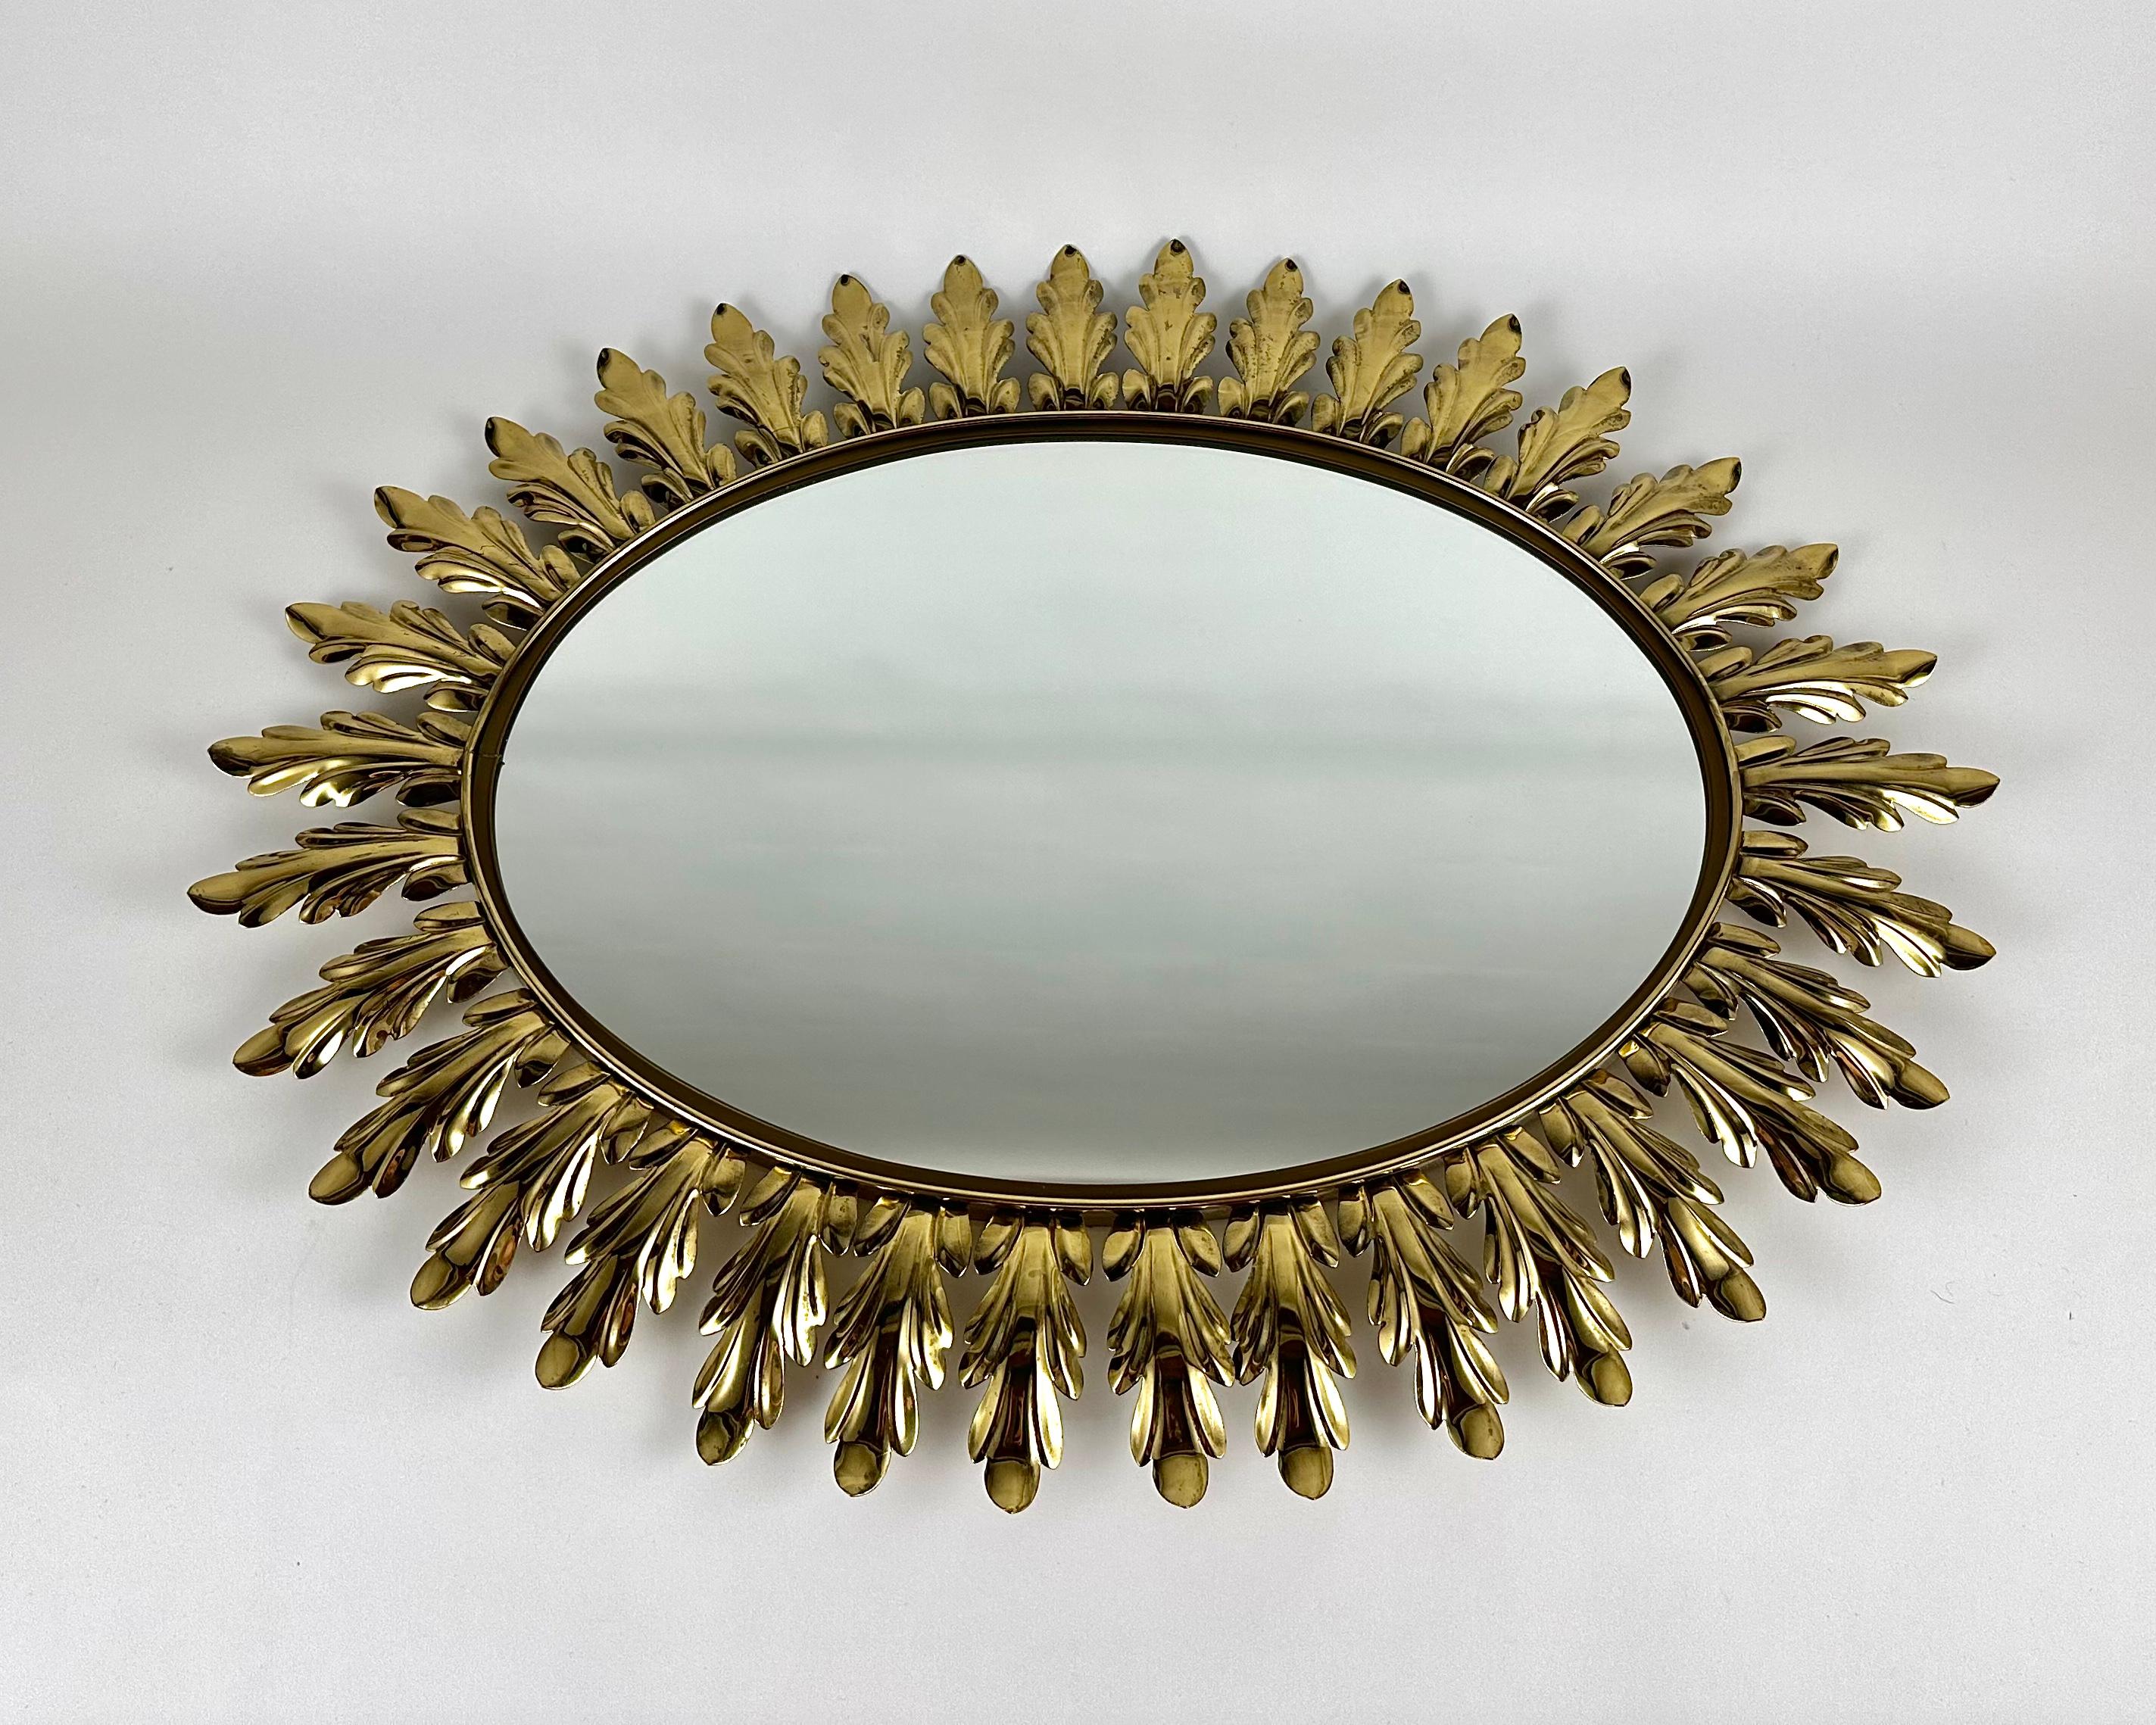  Sunburst Wall Mirror in Solid Acanthus Leaf Metal Frame, Belgium, 1970s In Excellent Condition For Sale In Bastogne, BE